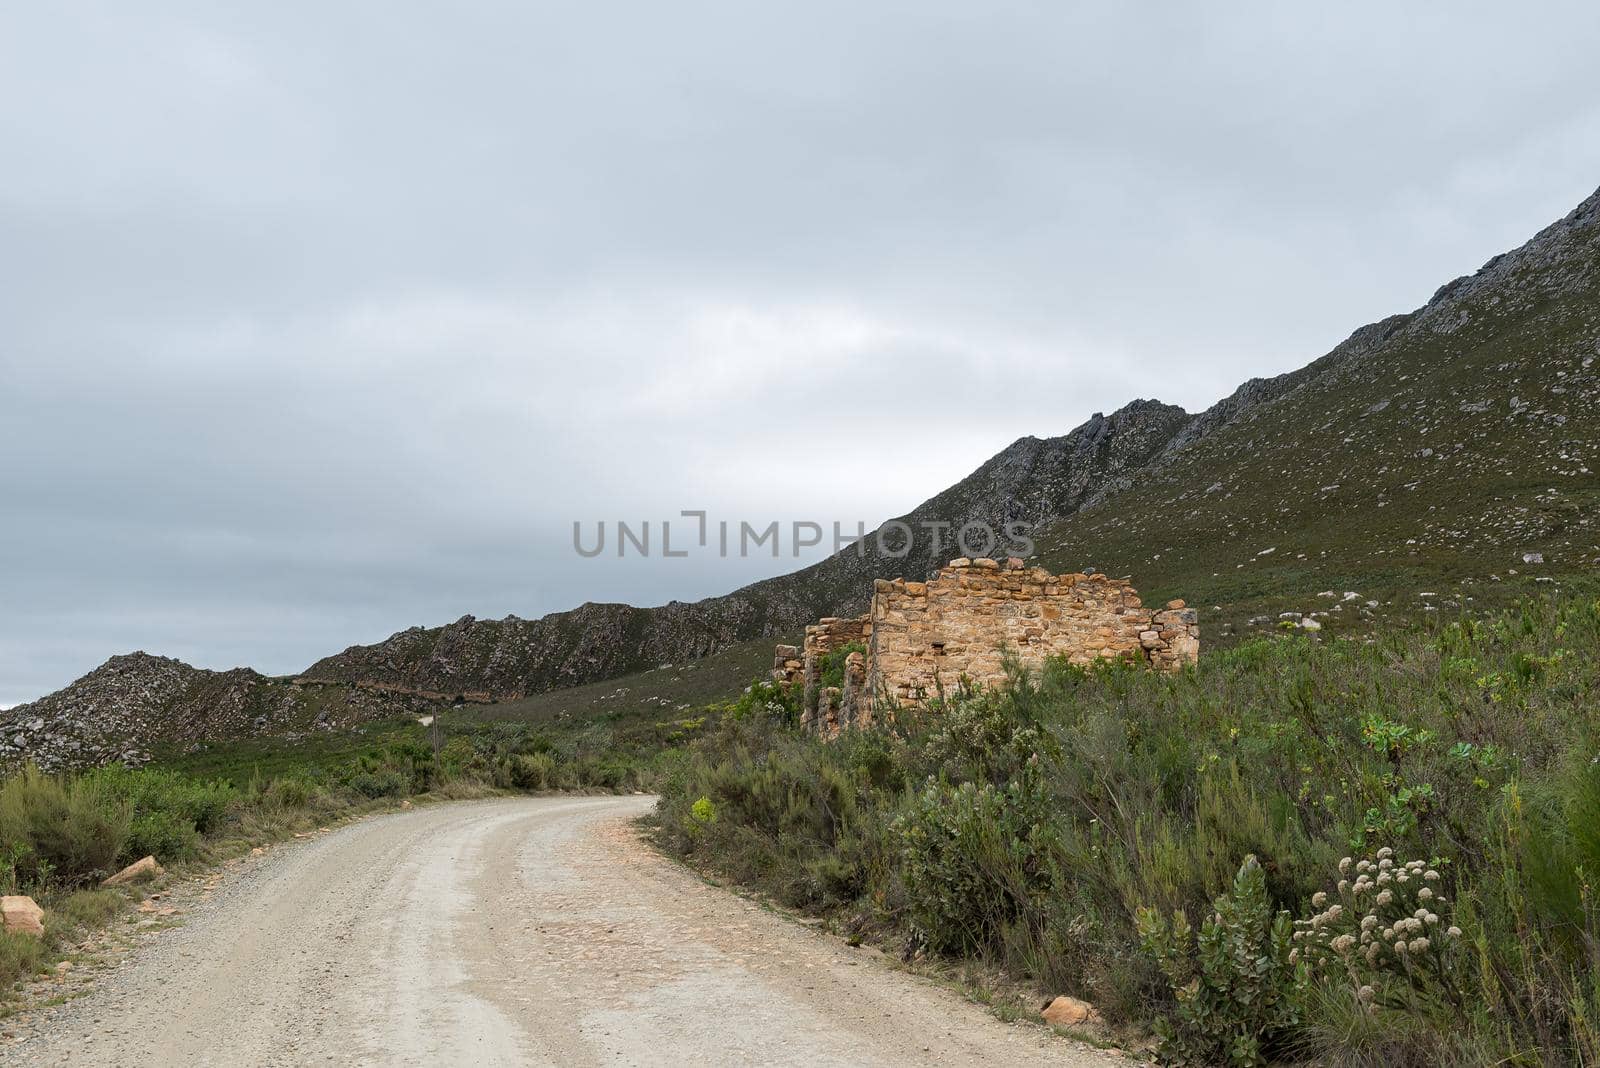 Ruins of the historic toll house on the Swartberg Pass by dpreezg